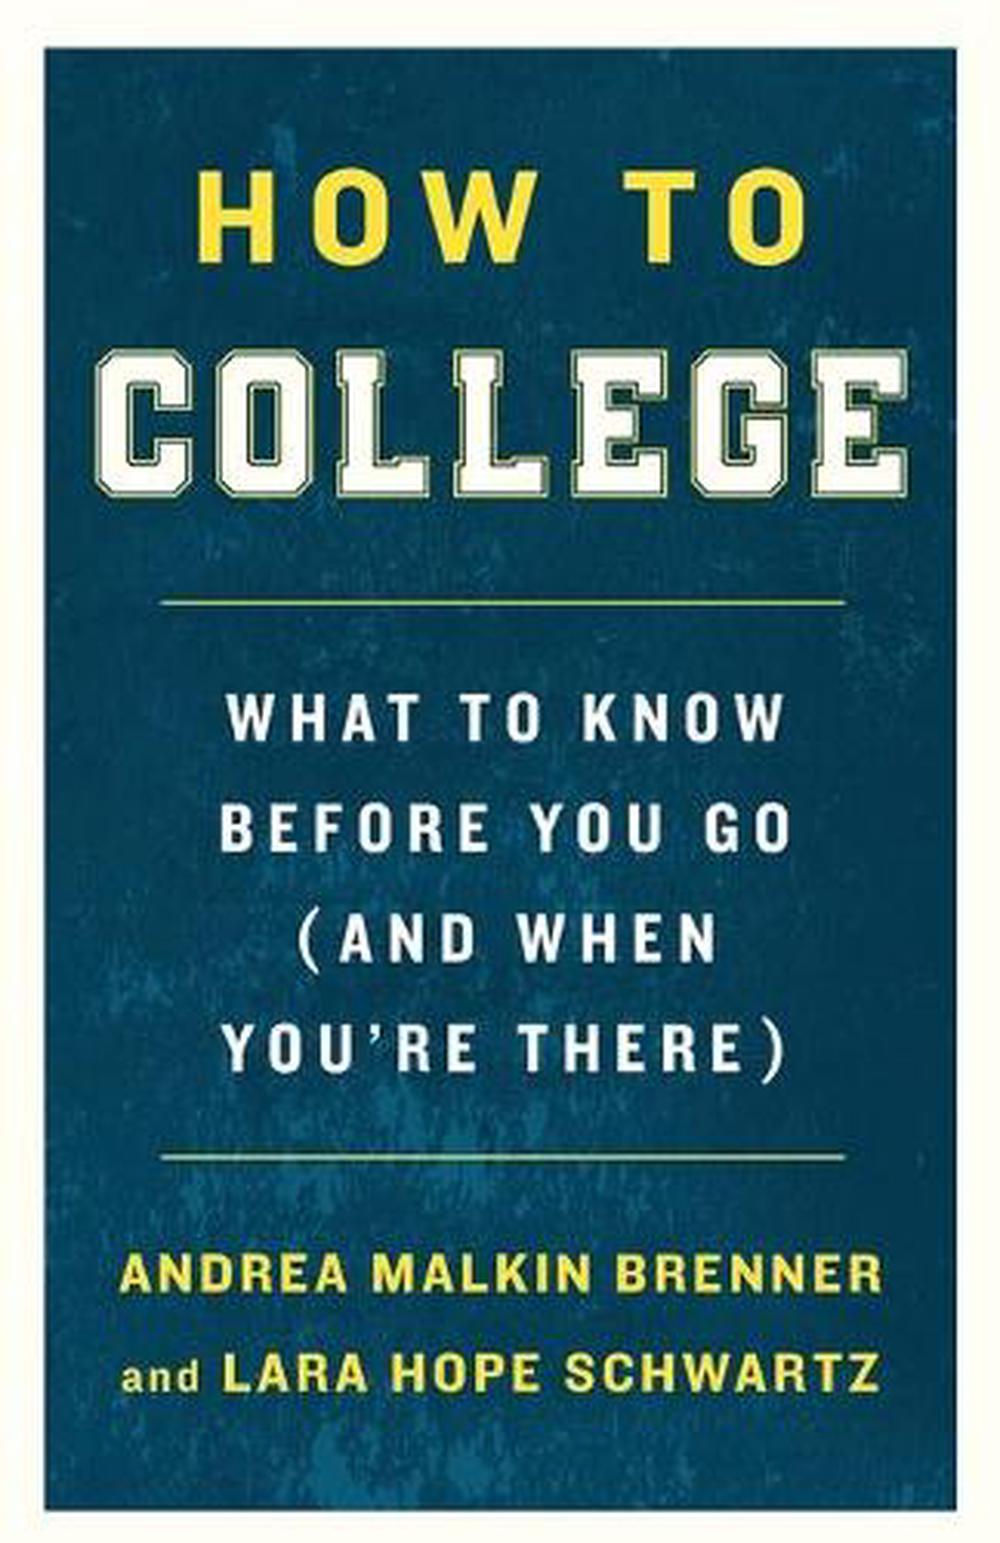 How to College by Andrea Malkin Brenner